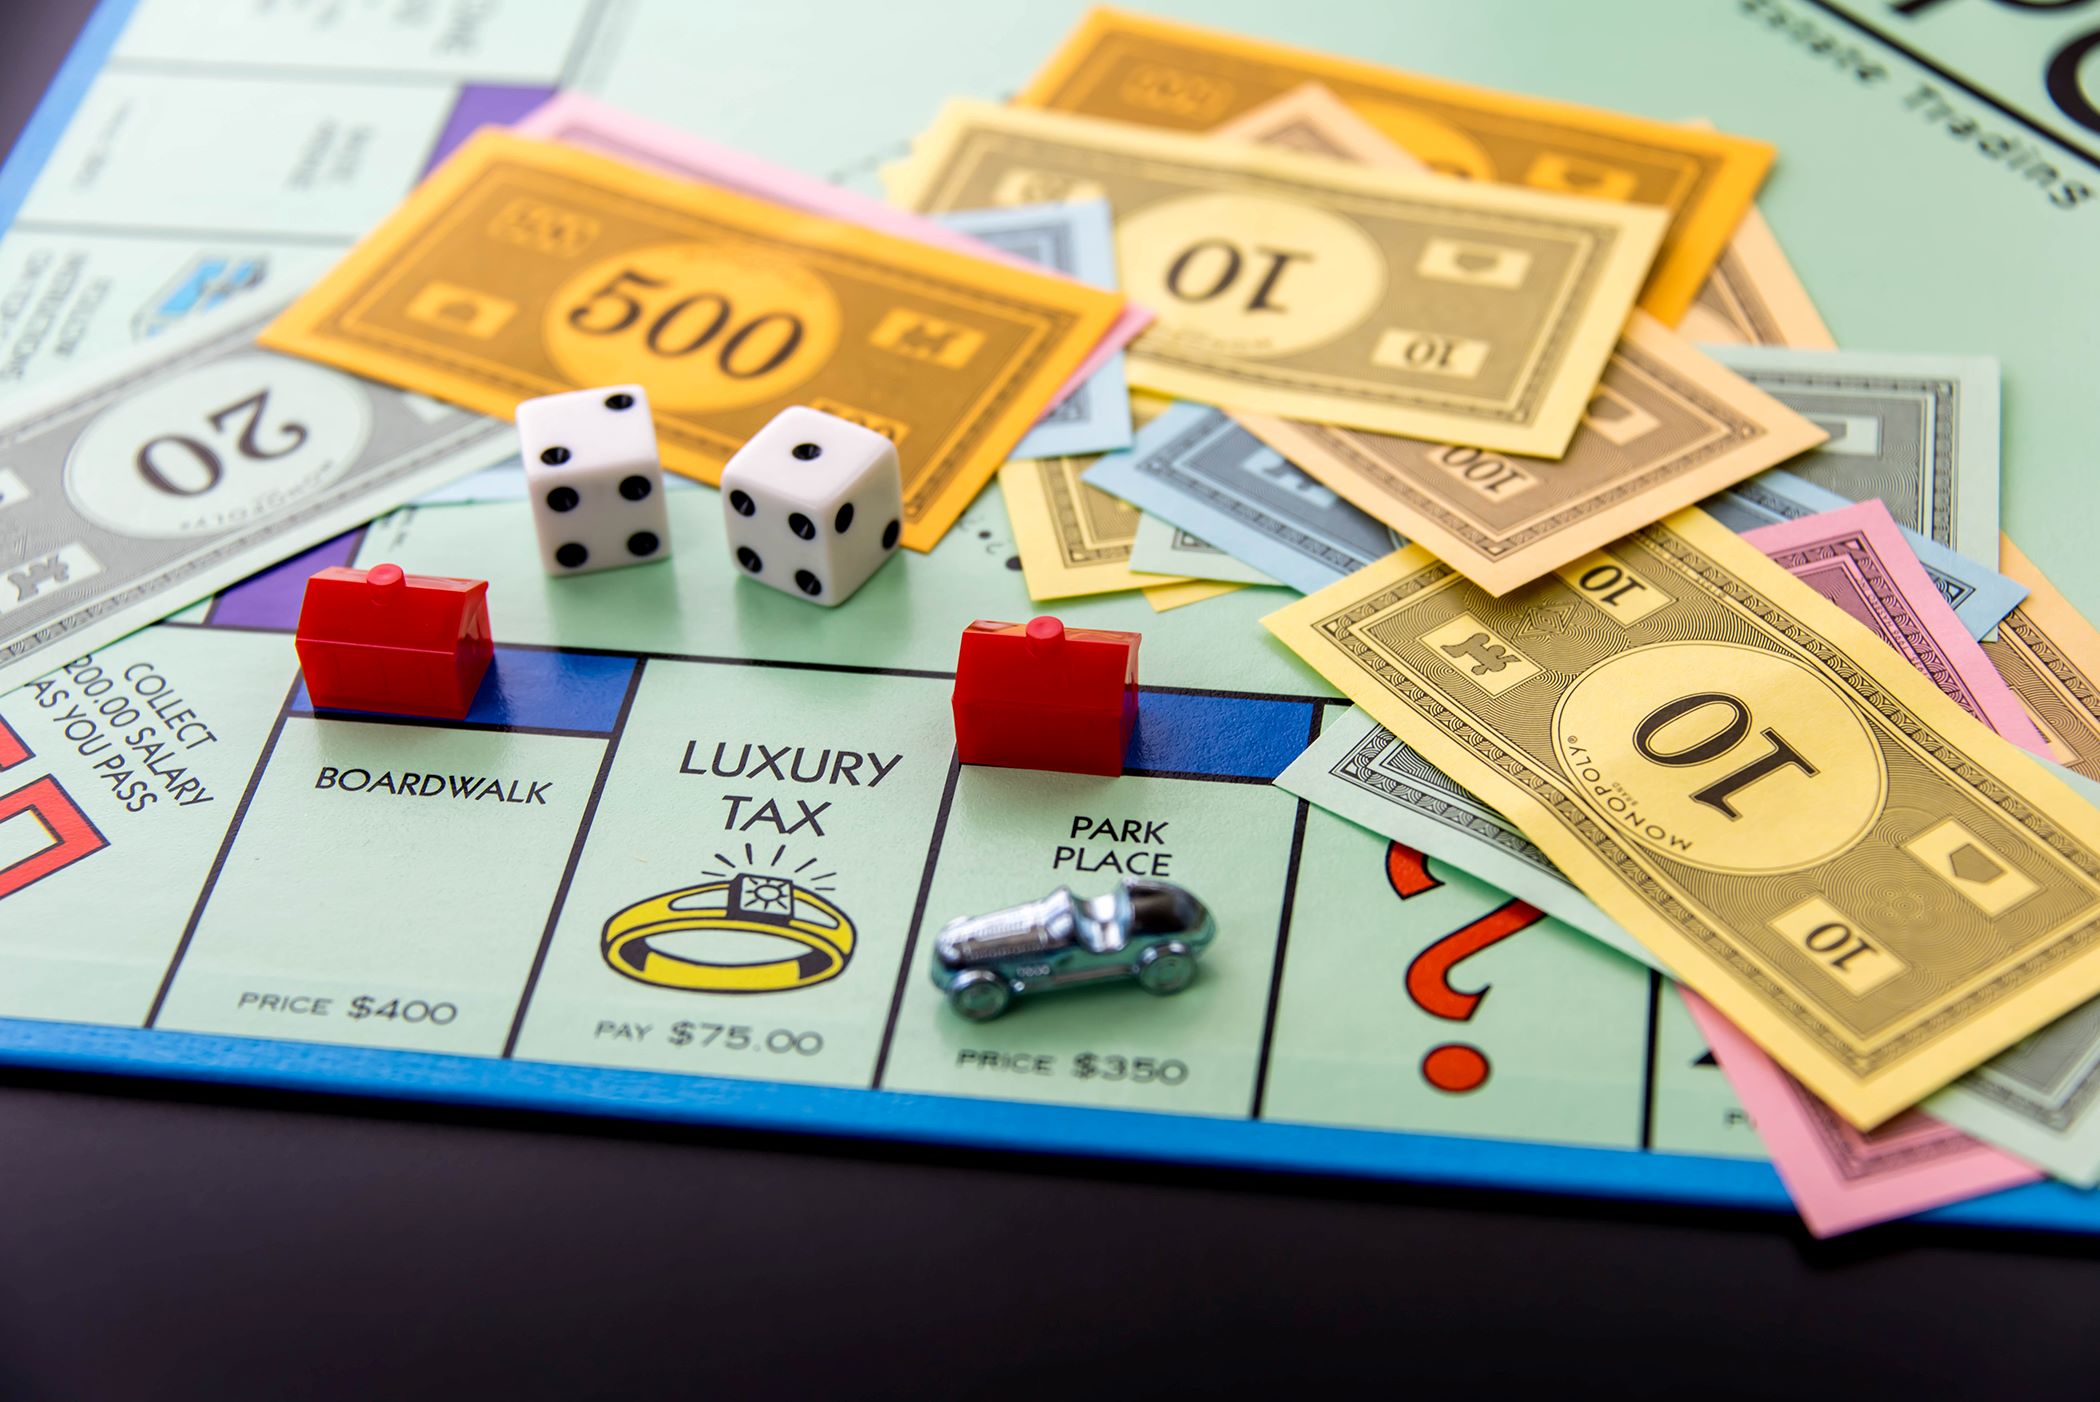 Win The Real-Life Monopoly With This Powerful Real Estate Tool